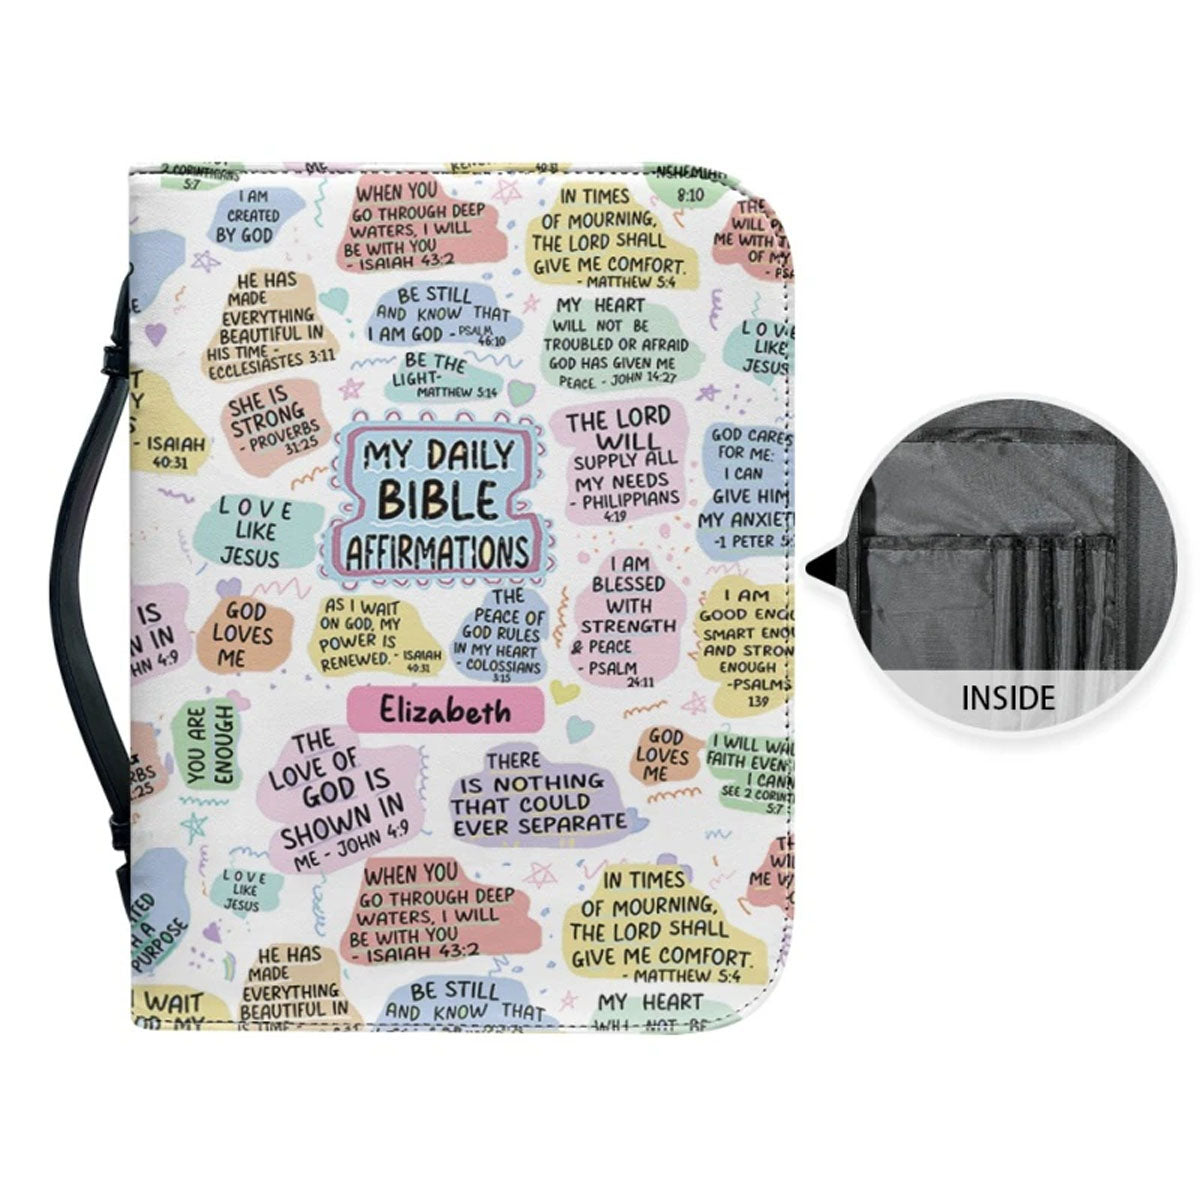 Christianartbag Bible Cover, My Bible Affirmations Personalized Bible Cover, Personalized Bible Cover, Gifts For Women, Christmas Gift, CABBBCV02150823.